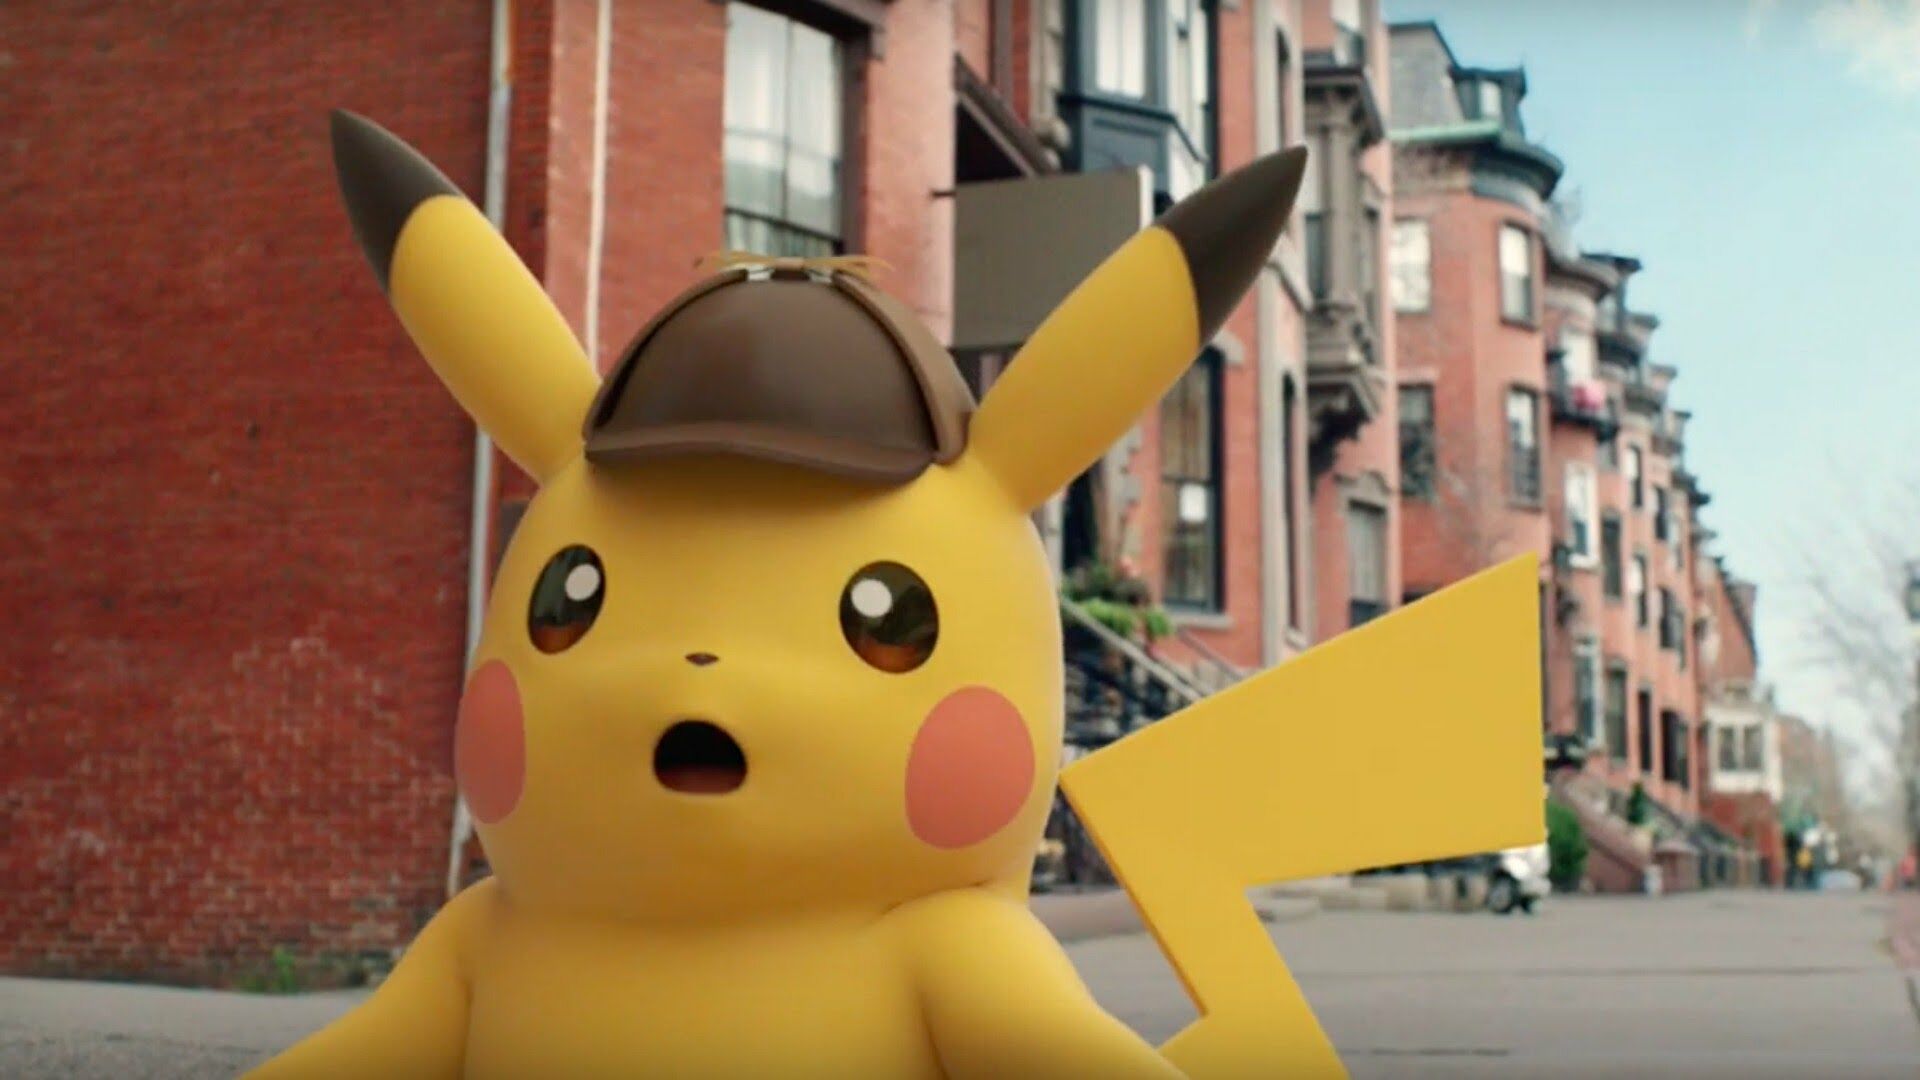 Detective Pikachu 2 “nearing release” according to one developer’s LinkedIn page